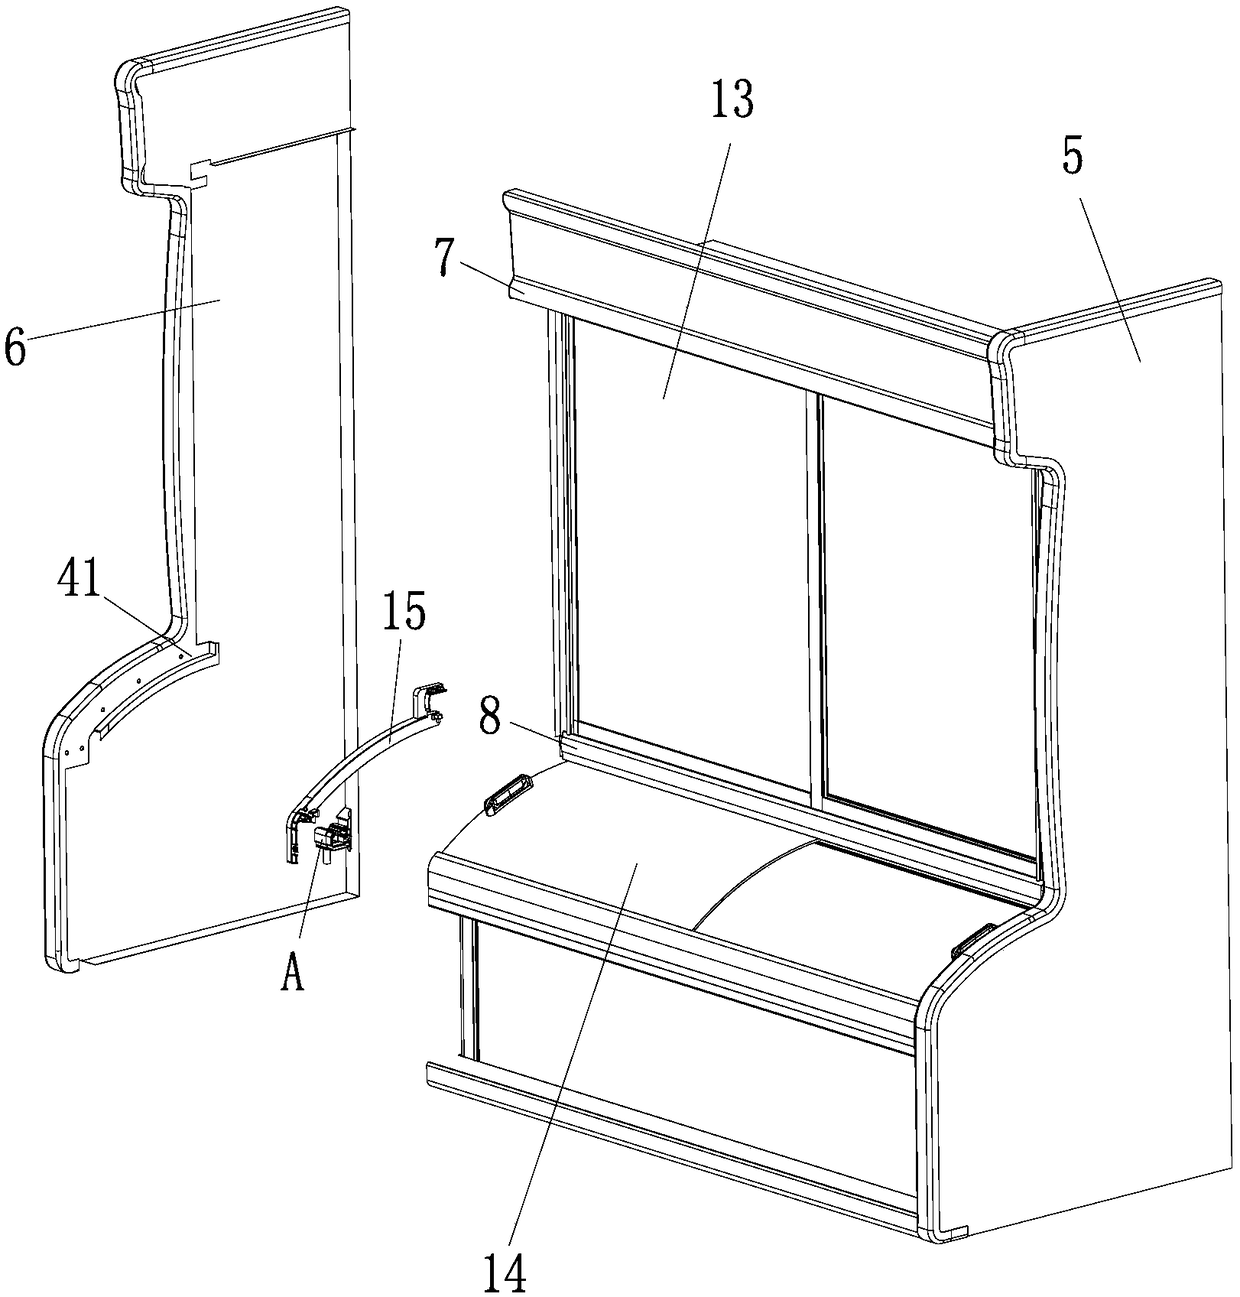 Water guide assembly for dish ordering cabinet